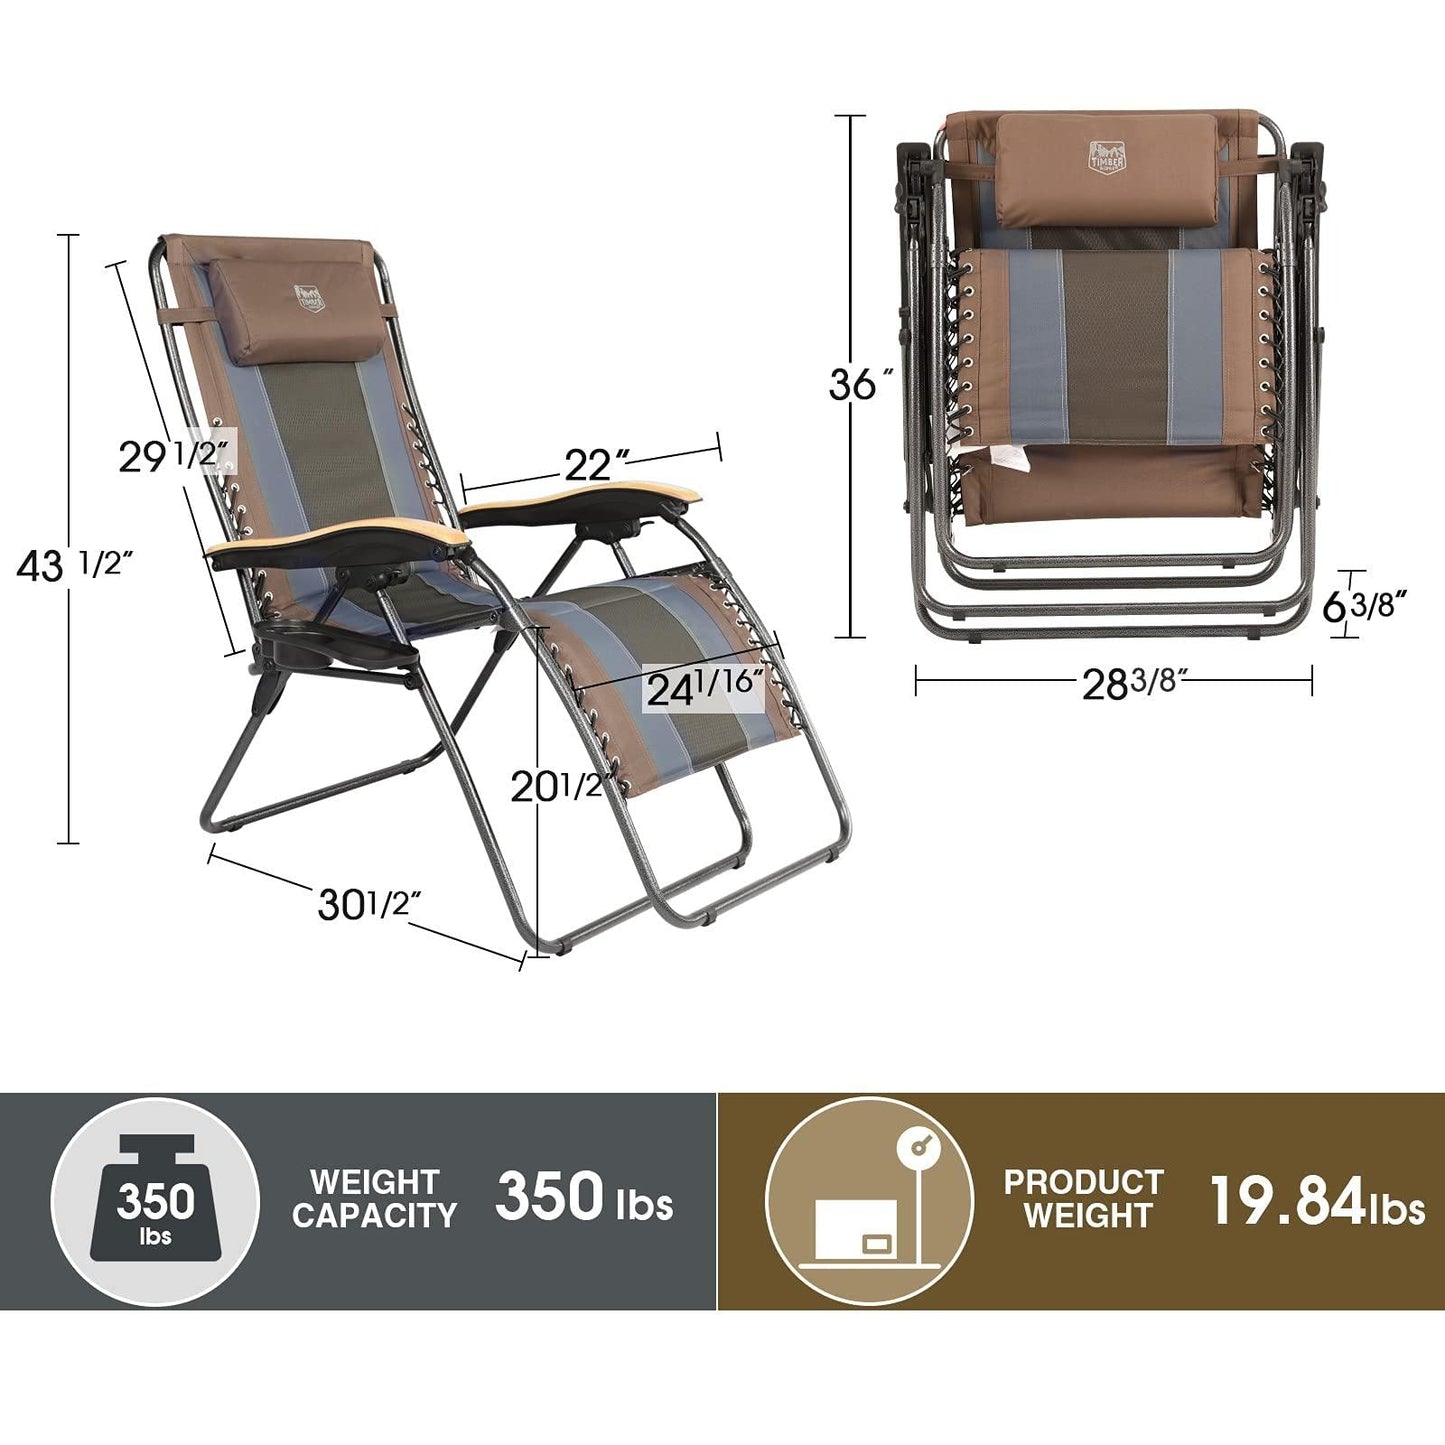 TIMBER RIDGE Oversized Zero Gravity Padded with Adjustable Headrest and Cup Holder Outdoor Recliner Chair XXL for Lawn, Camping, Patio, Support up to 350 LBS, Brown